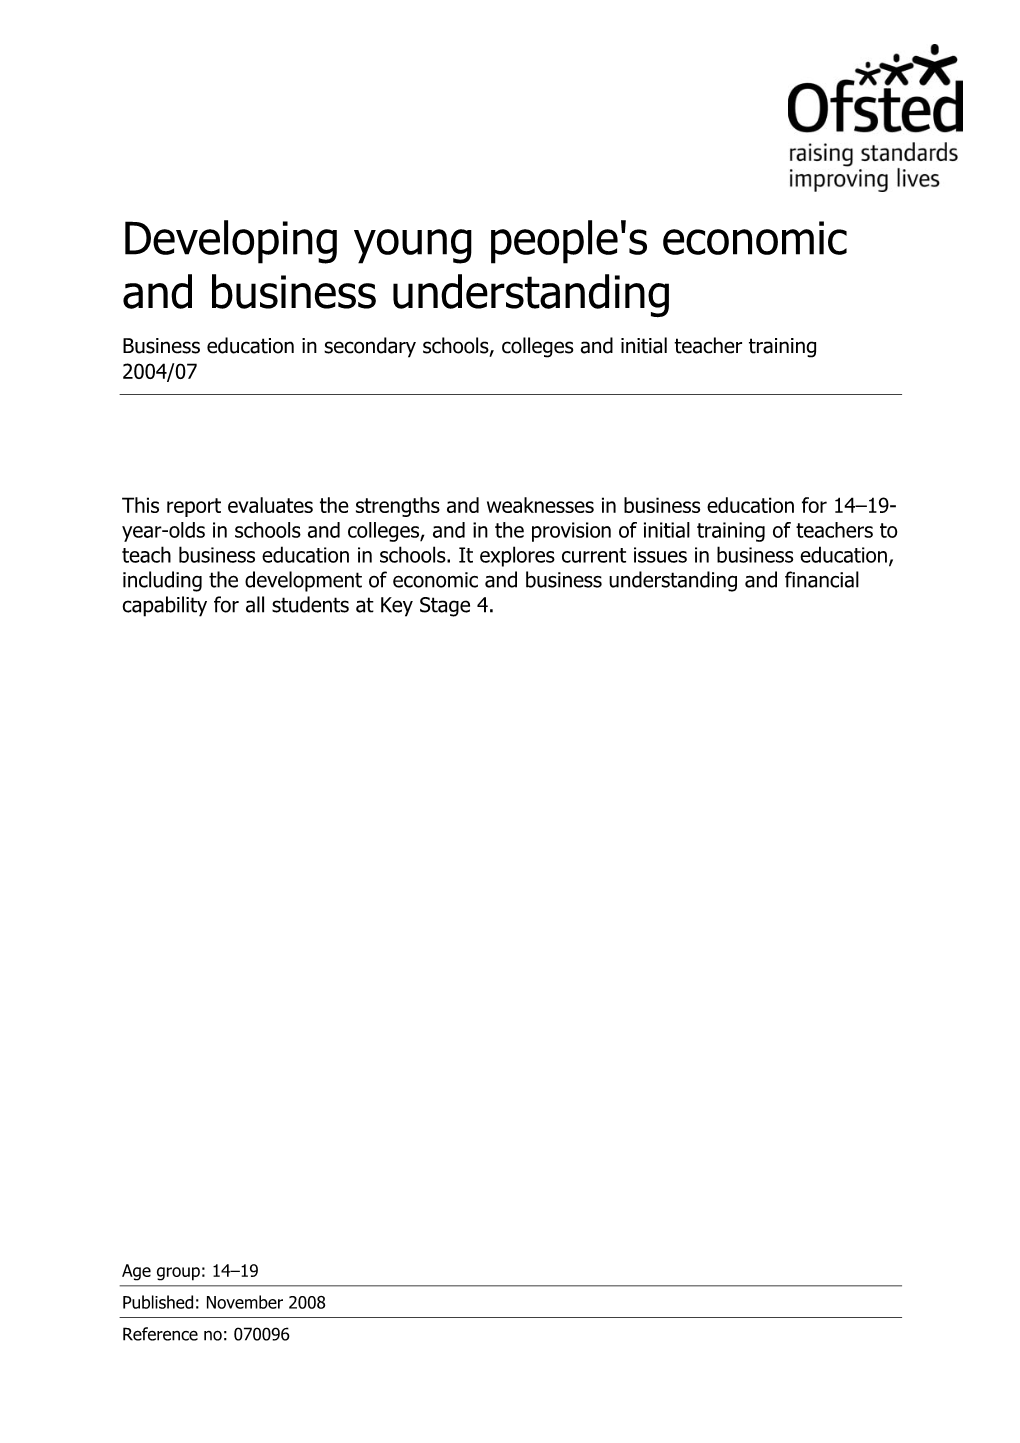 Developing Young People's Economic and Business Understanding Business Education in Secondary Schools, Colleges and Initial Teacher Training 2004/07